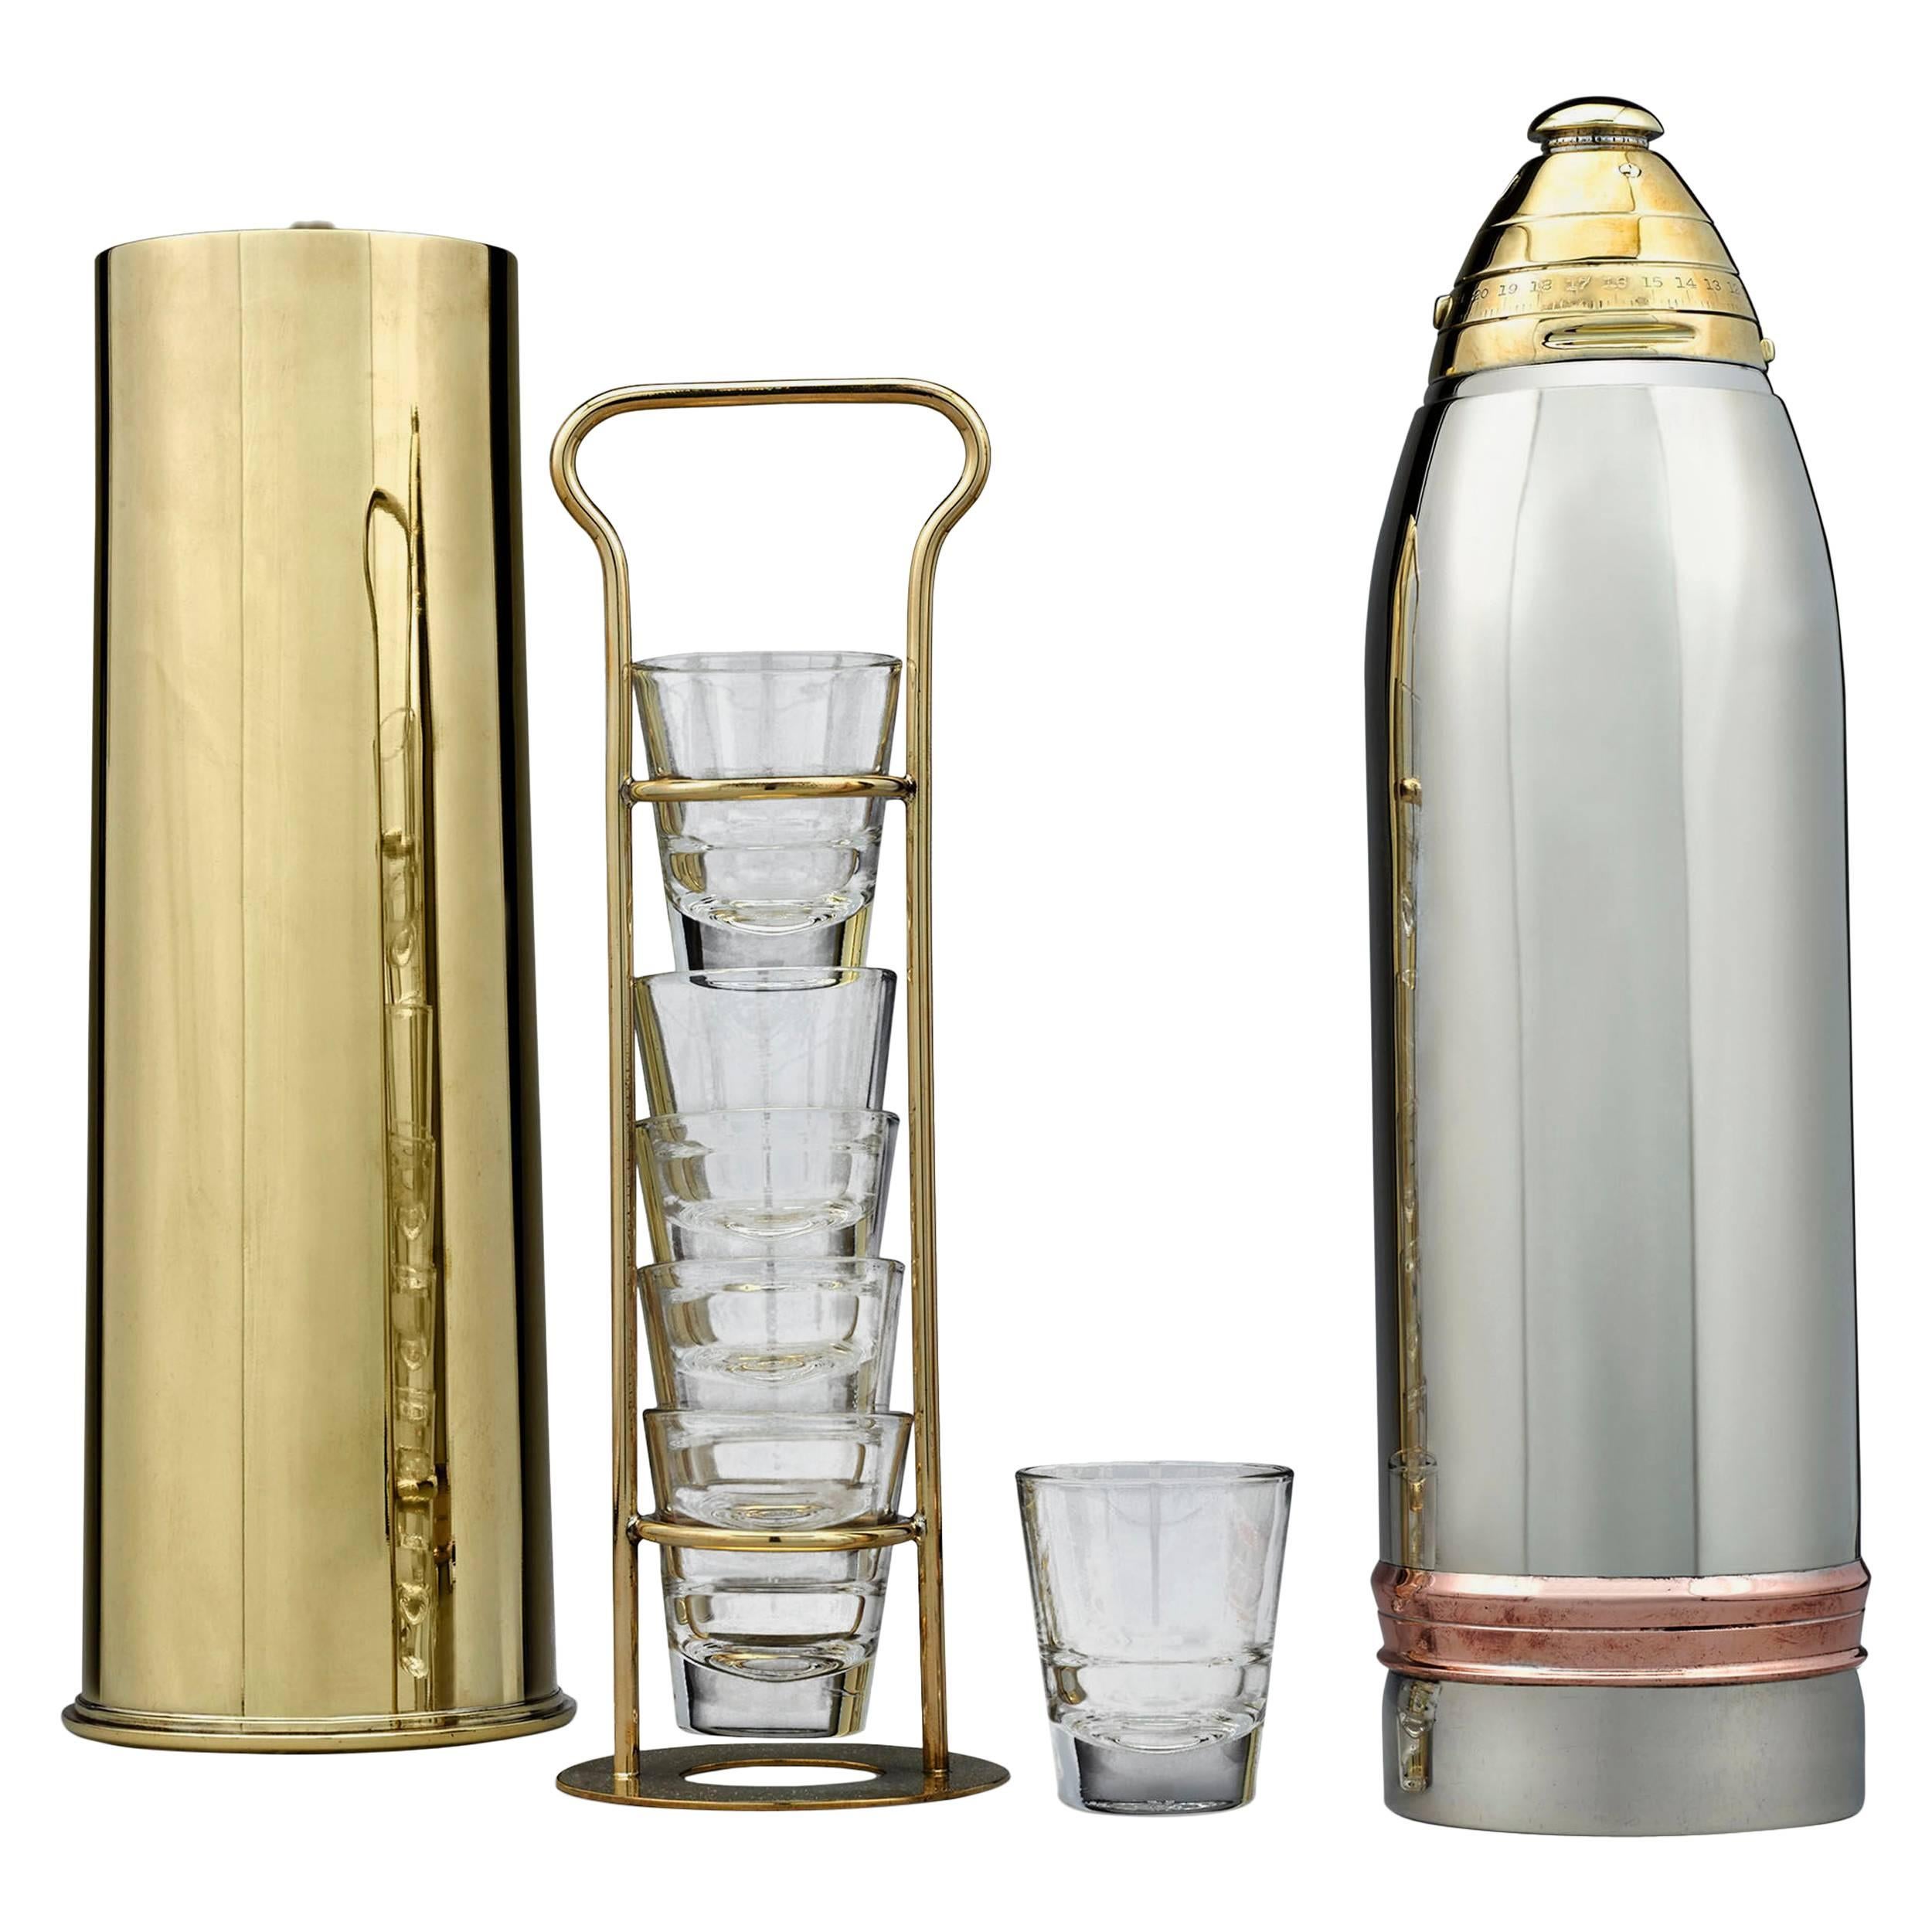 Artillery Shell Cocktail Shaker by Gorham